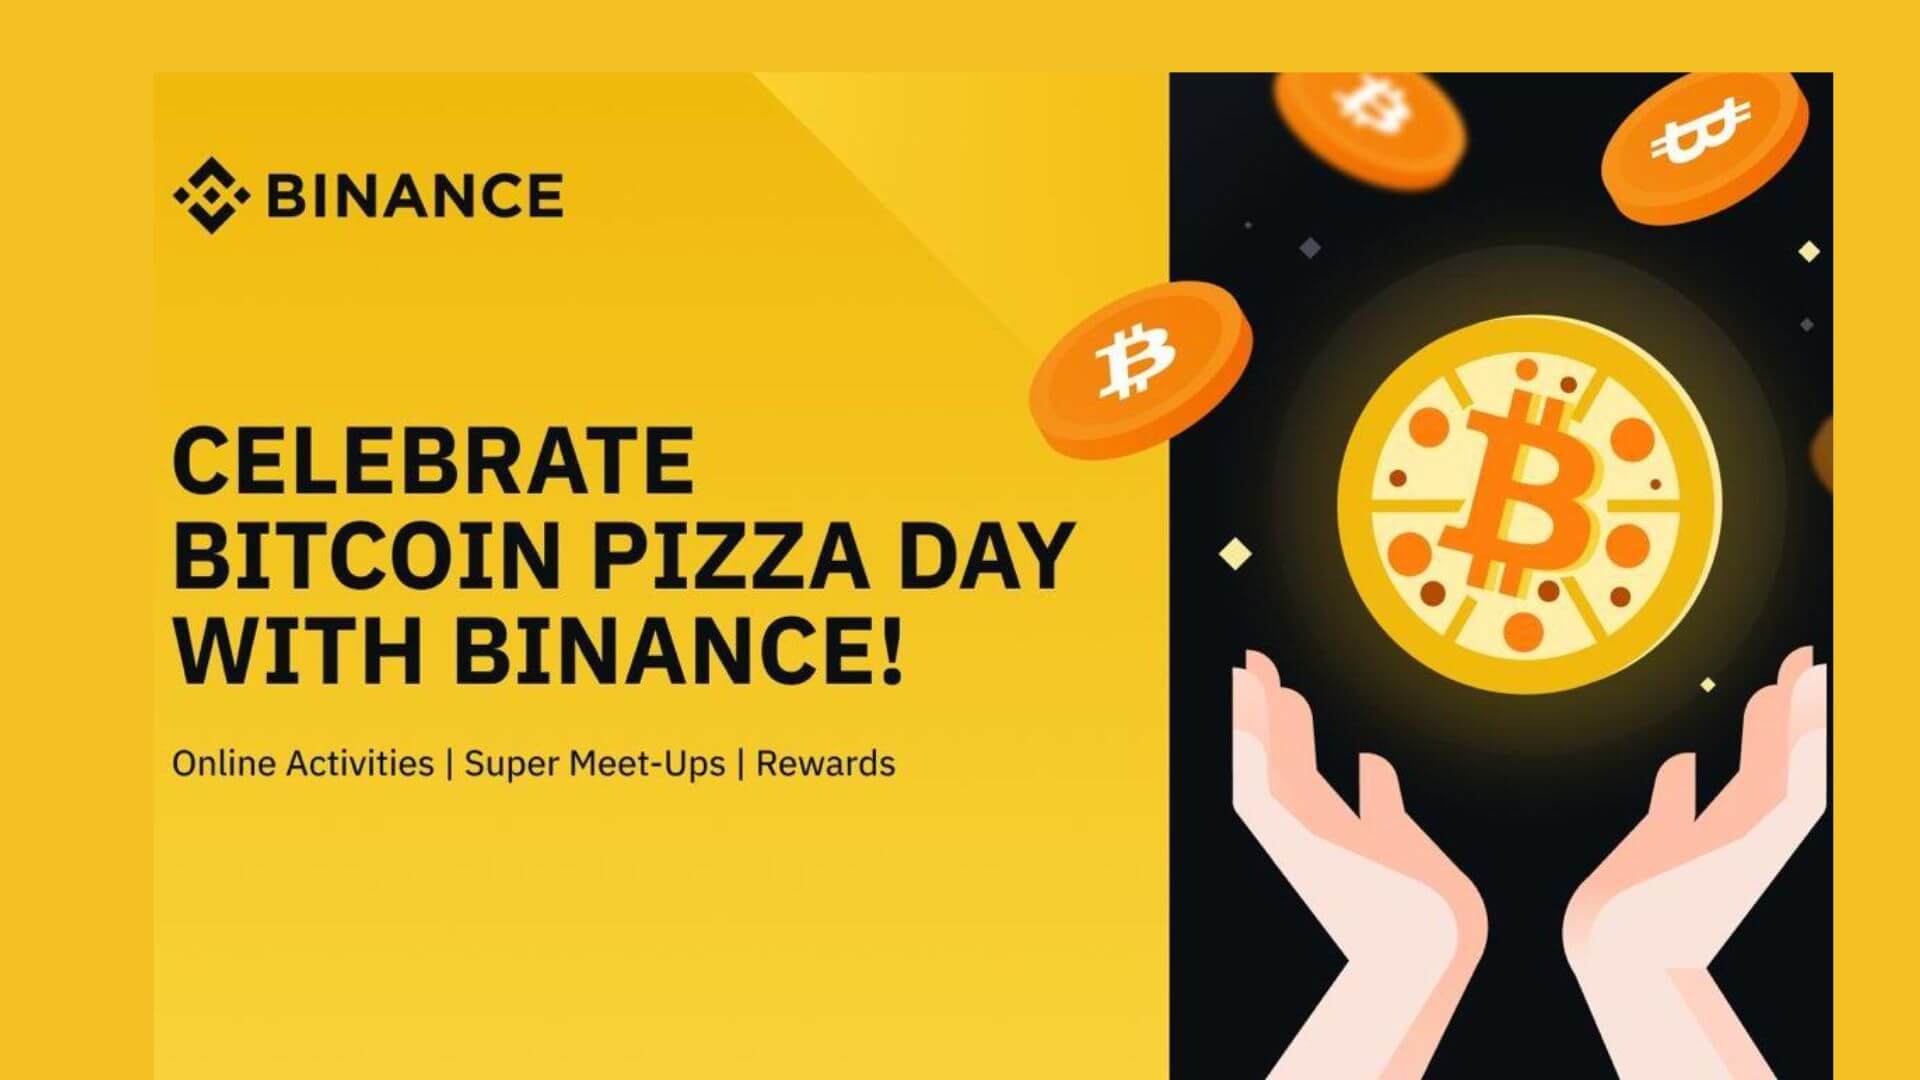 Binance Celebrates 13th Anniversary of Bitcoin Pizza Day with Global Meet-ups and Online Contests